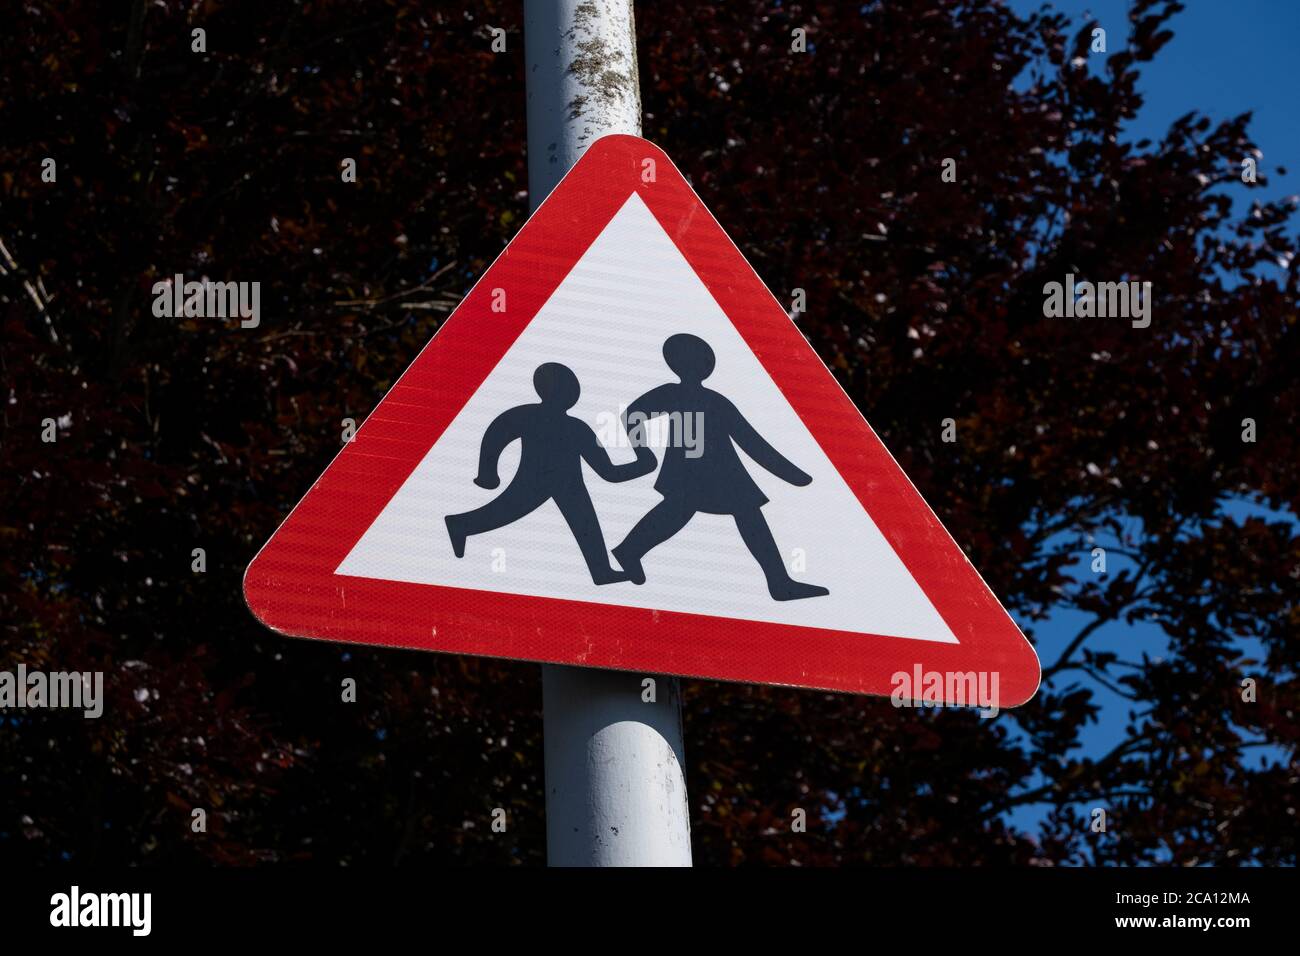 Street sign warning traffic of people crossing in Maghull May 2020 Stock Photo